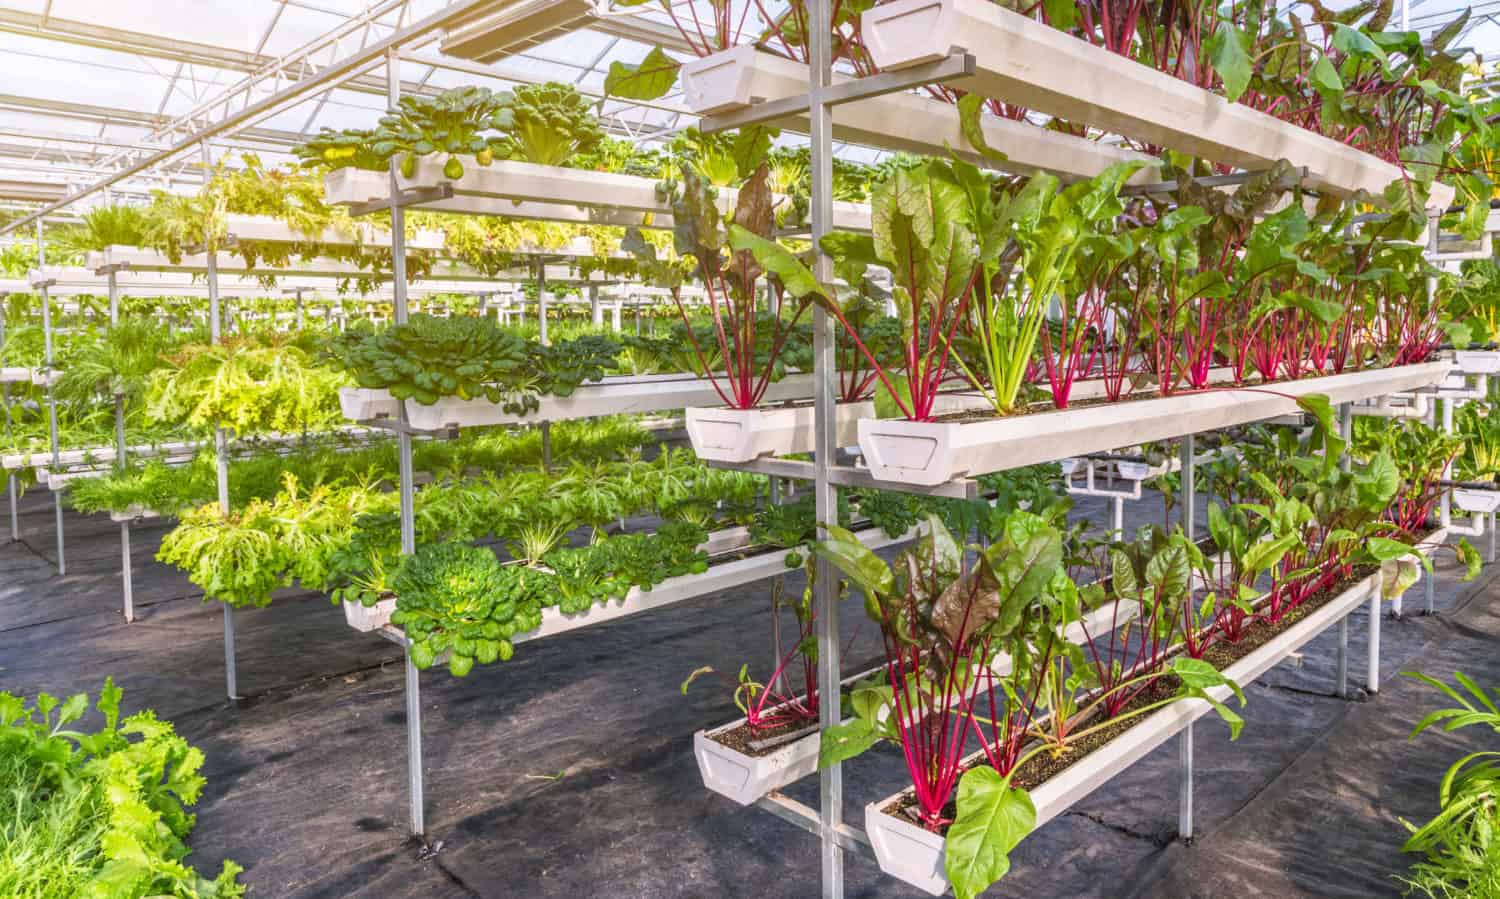 Urban farming is essential for economic, environmental, and regional stability as the world’s population is moving increasingly into its cities.